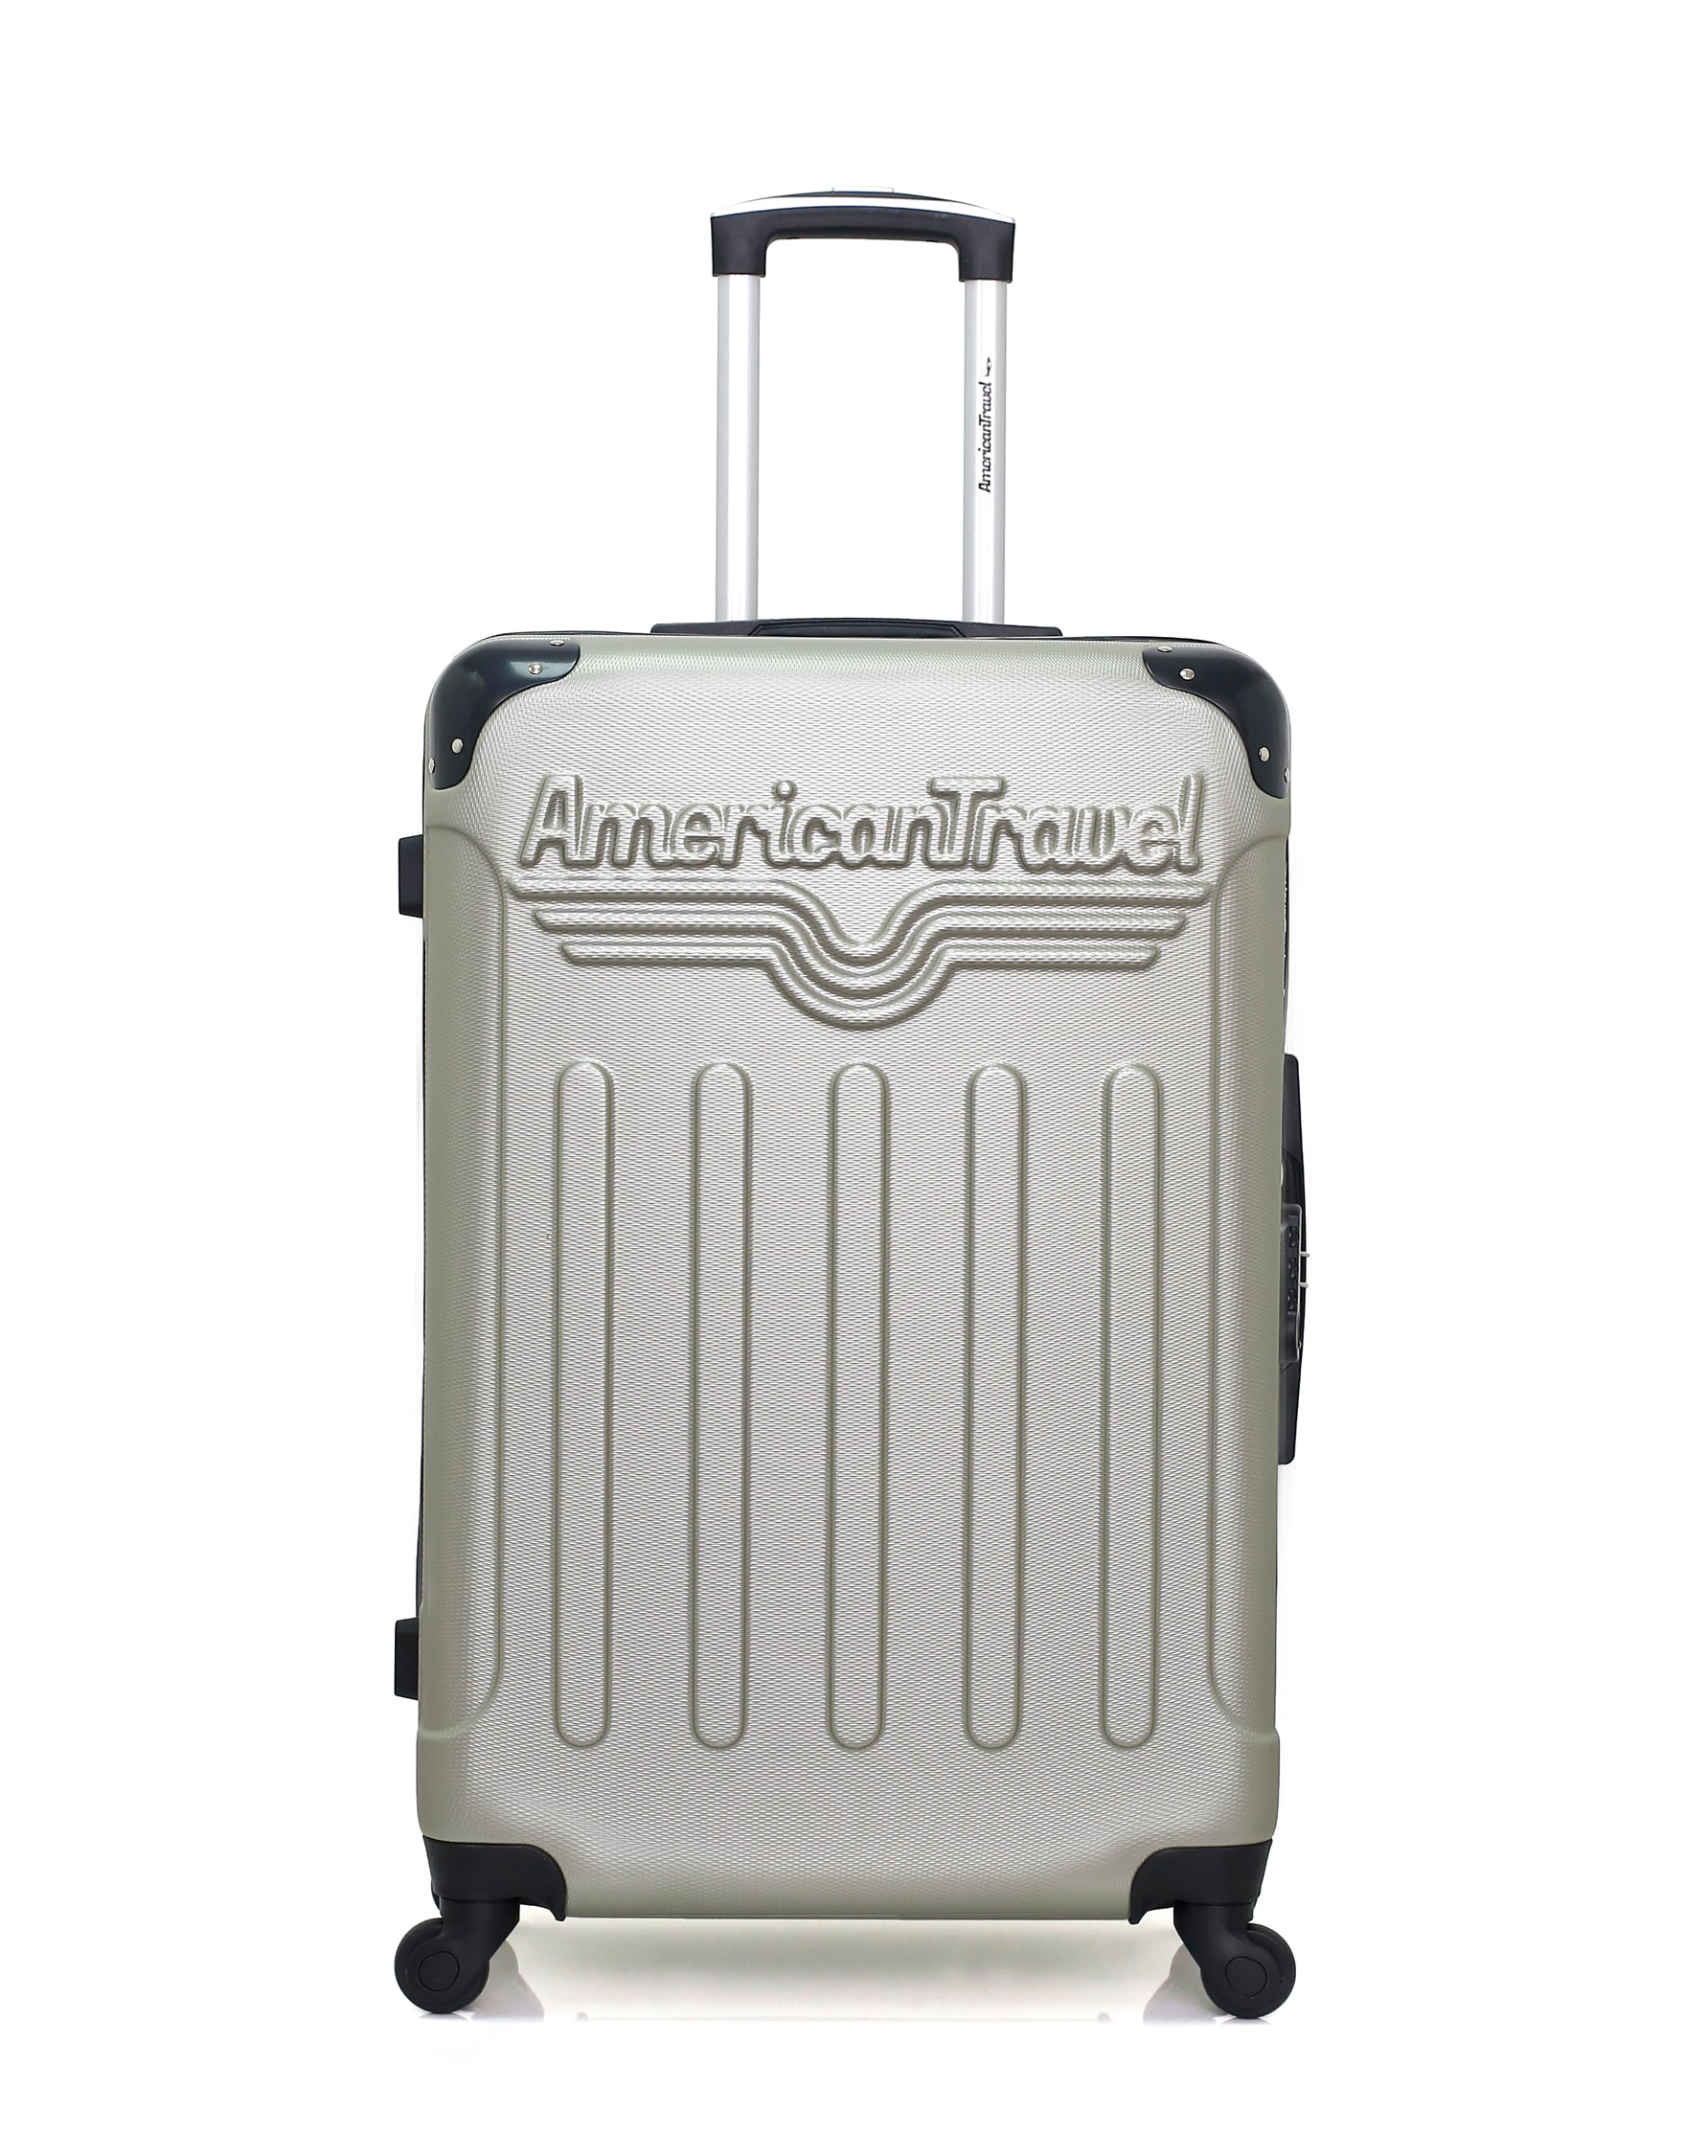 Valise Grand Format ABS HARLEM-A 4 Roues 70 cm